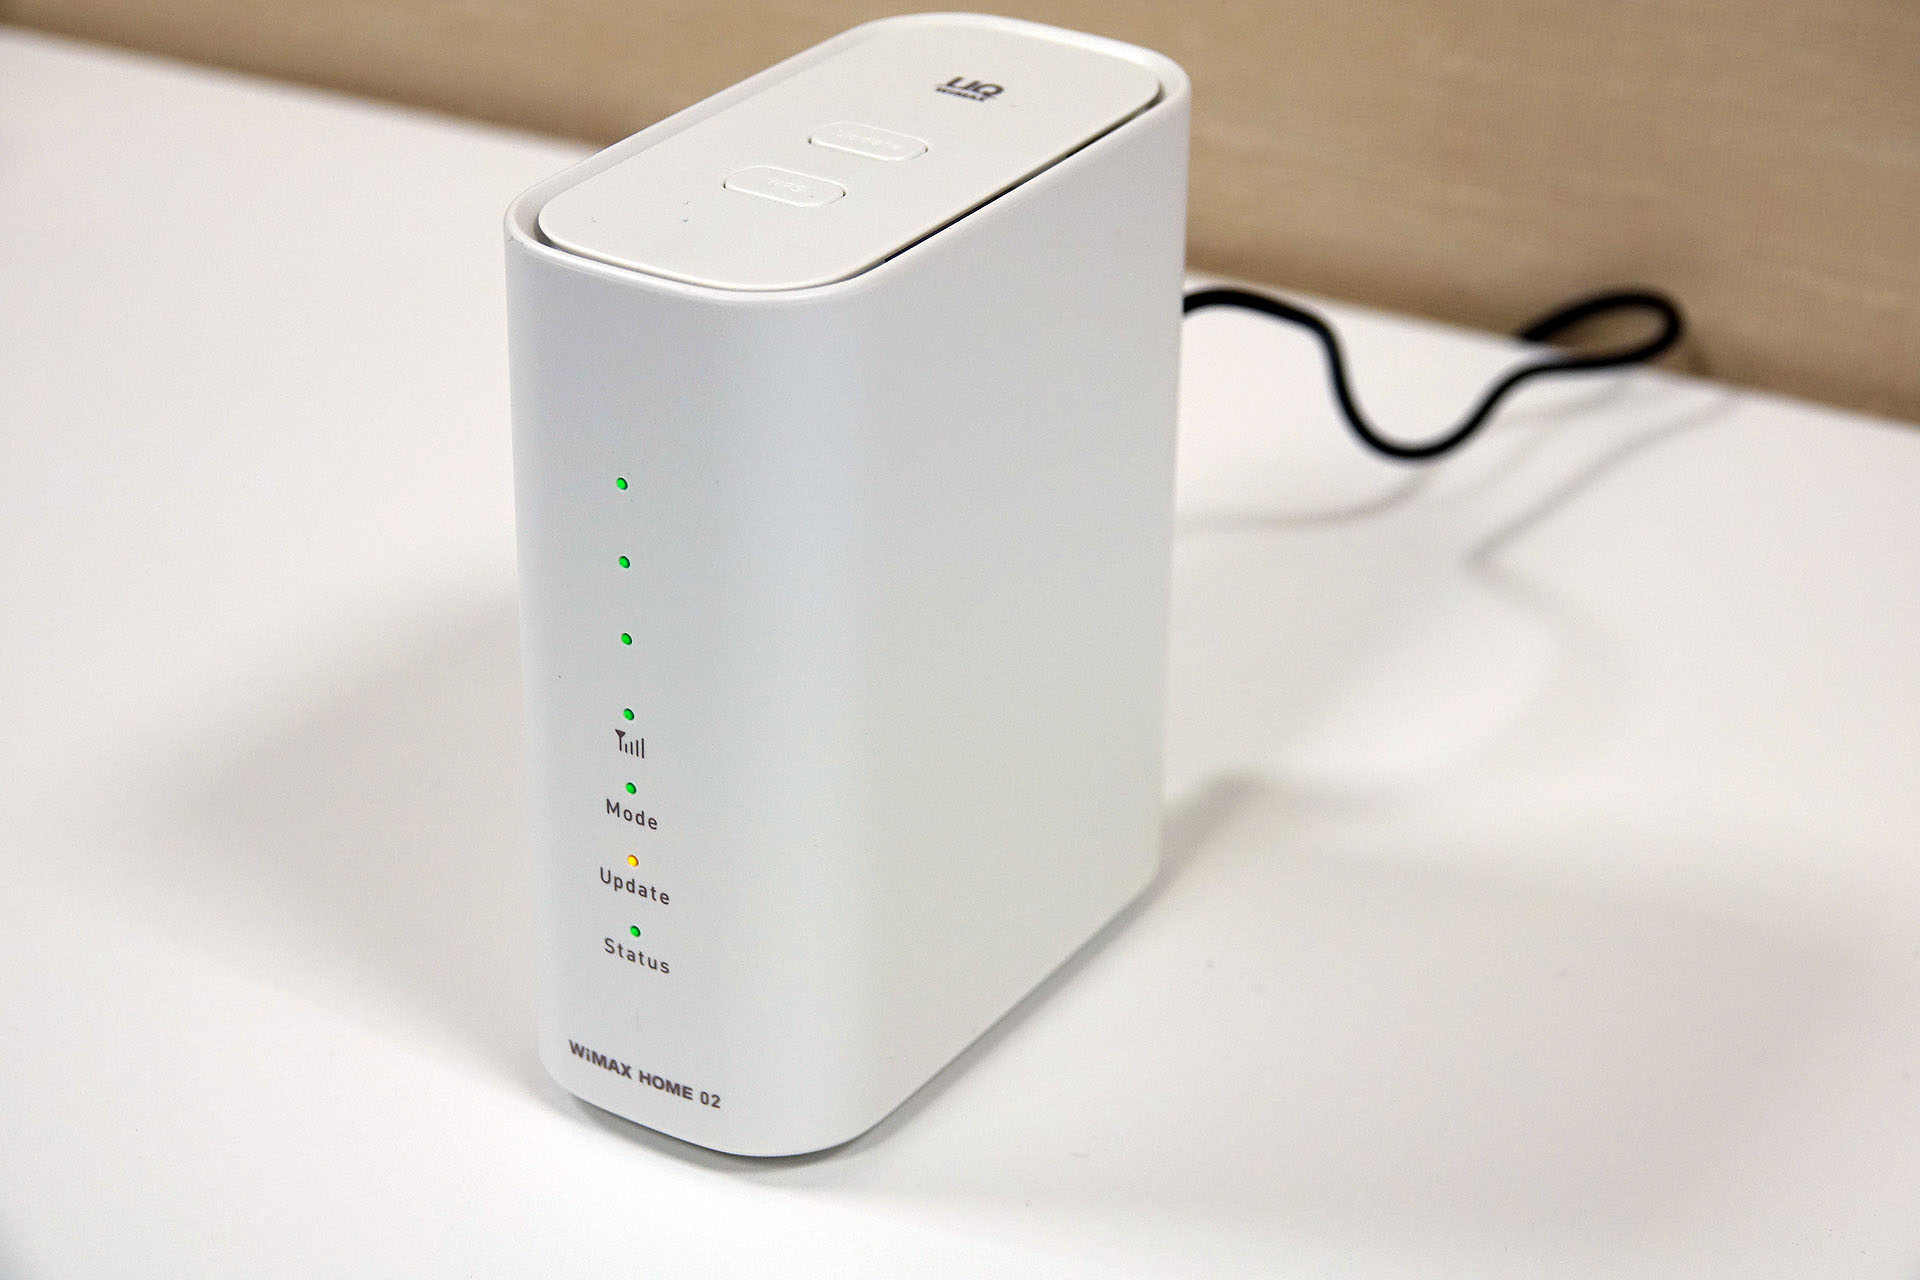 Uq Wimax 2 Lte対応のホームルーター Home 02 ケータイ Watch